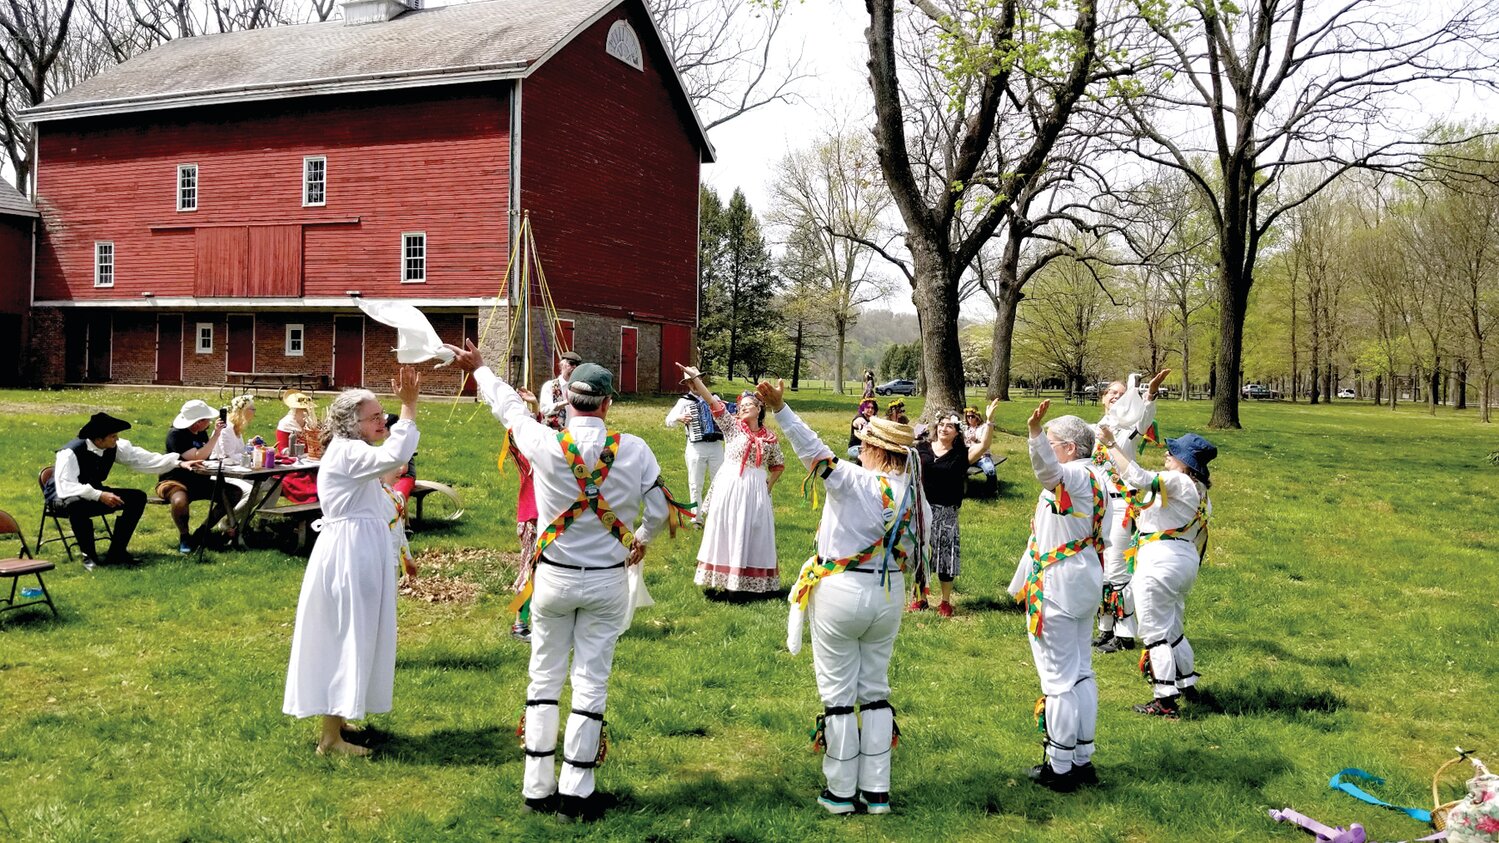 Opening day at the Erwin Stover House at Tinicum Park in Upper Black Eddy will feature bagpipes, live music and dancing beneath the maypole.